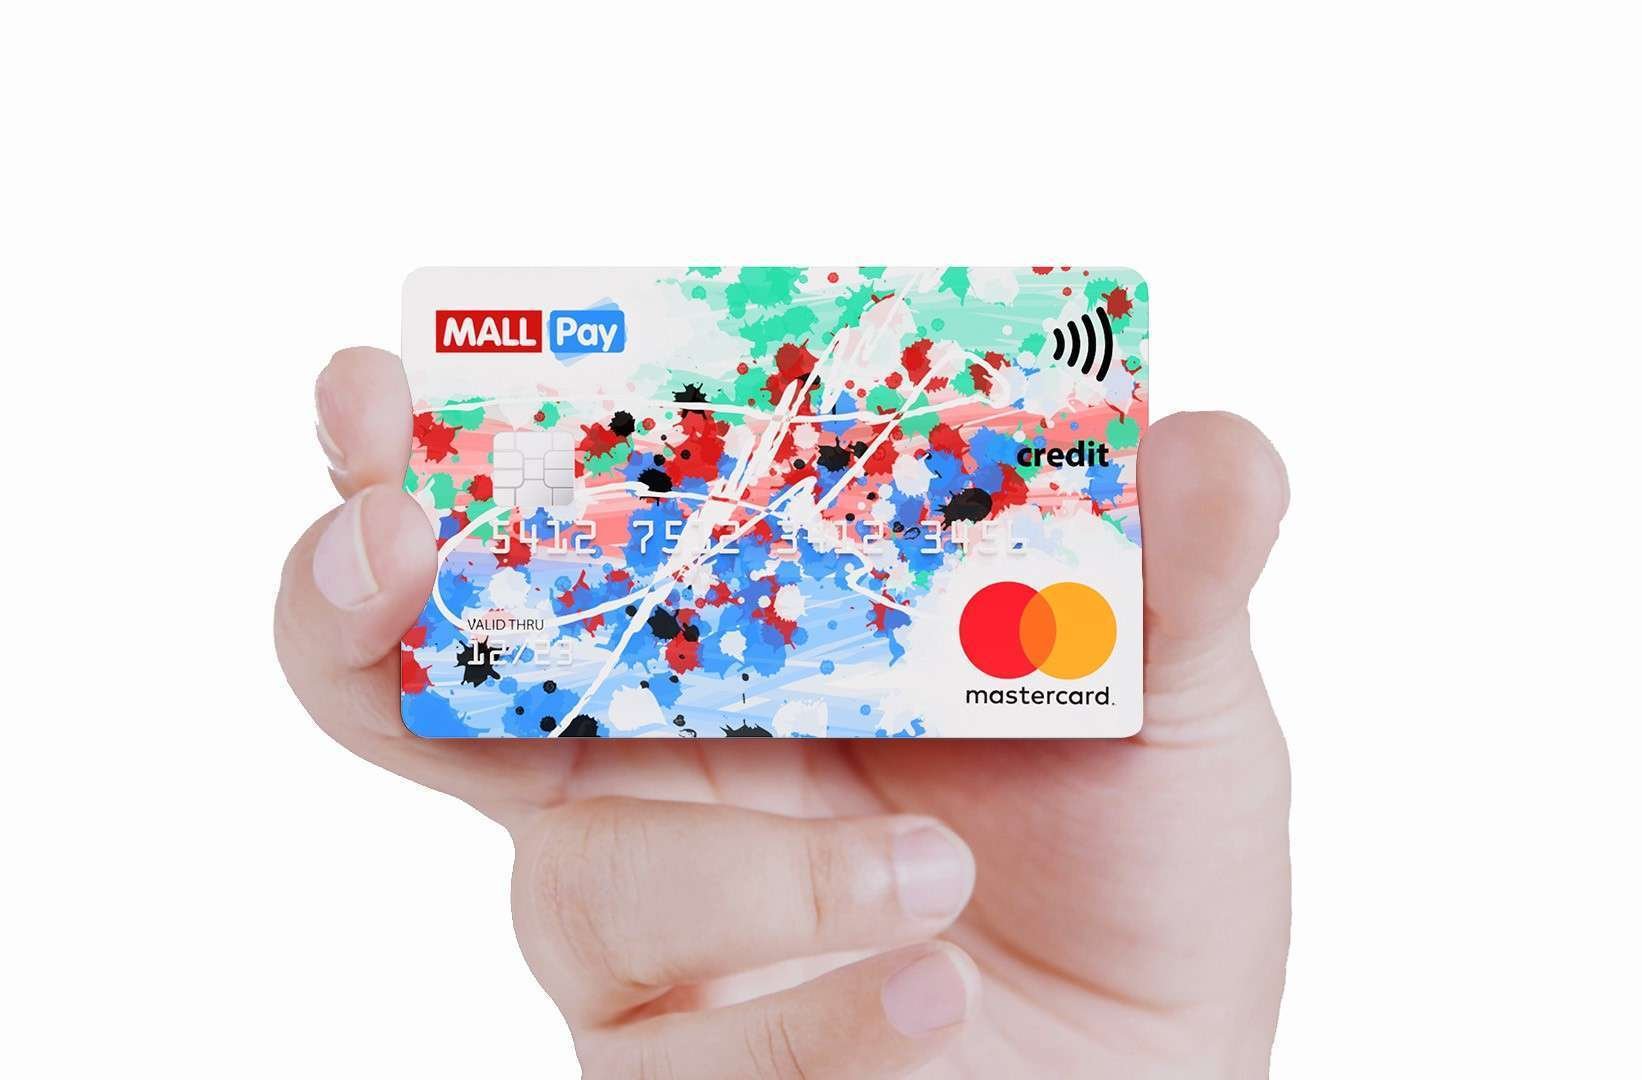 Miroslavo’s Design: Credit card proposal for a design competition from MALL Pay